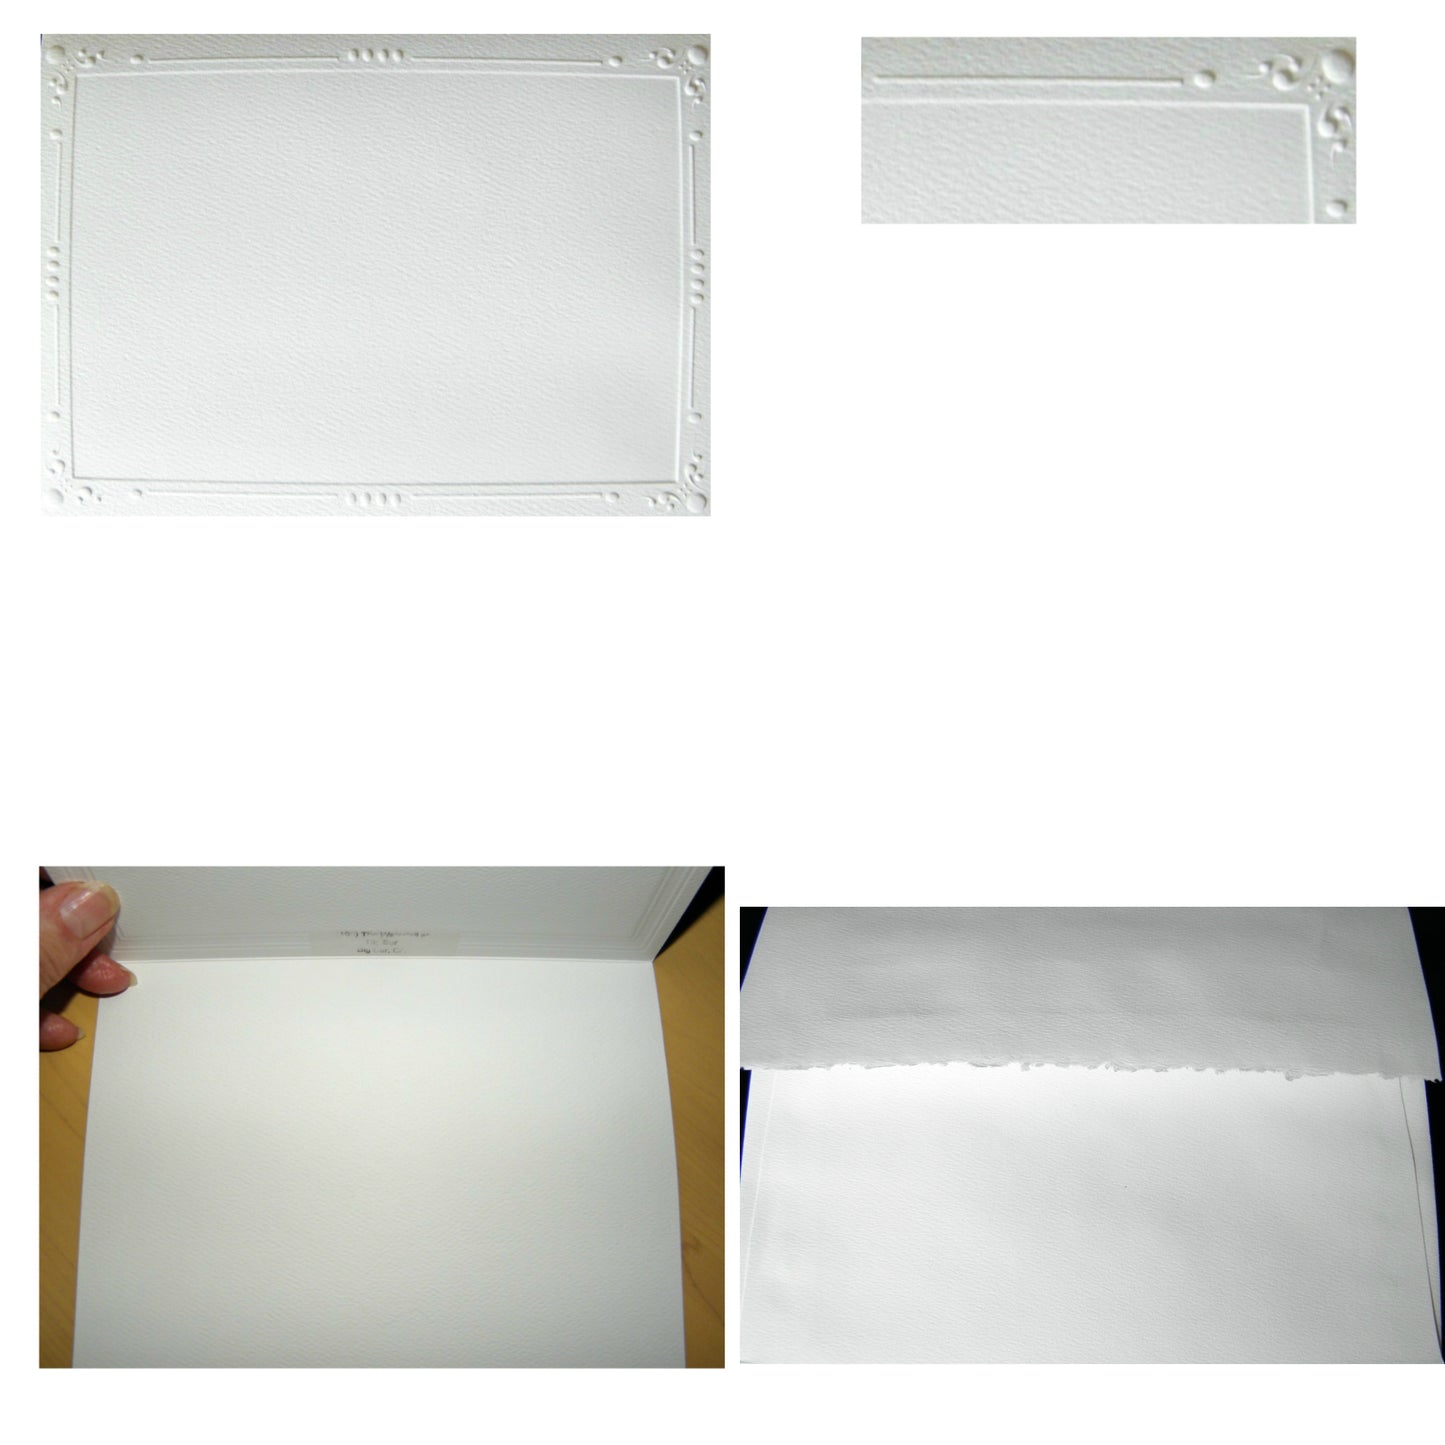 Photo collage of the Decorative card stock and envelope